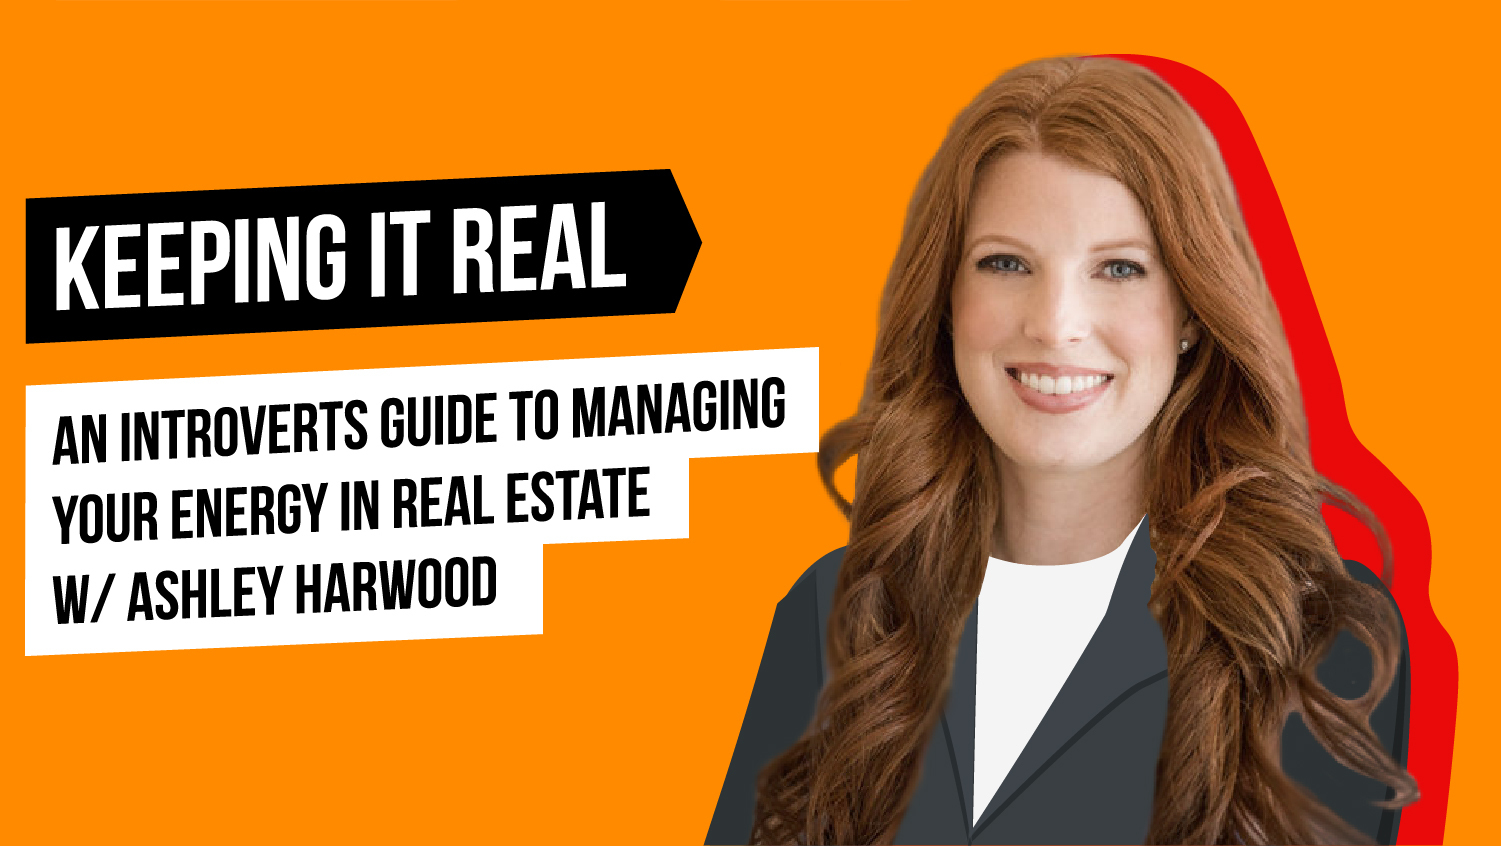 An Introvert’s Guide to Managing Your Energy in Real Estate With Ashley Harwood